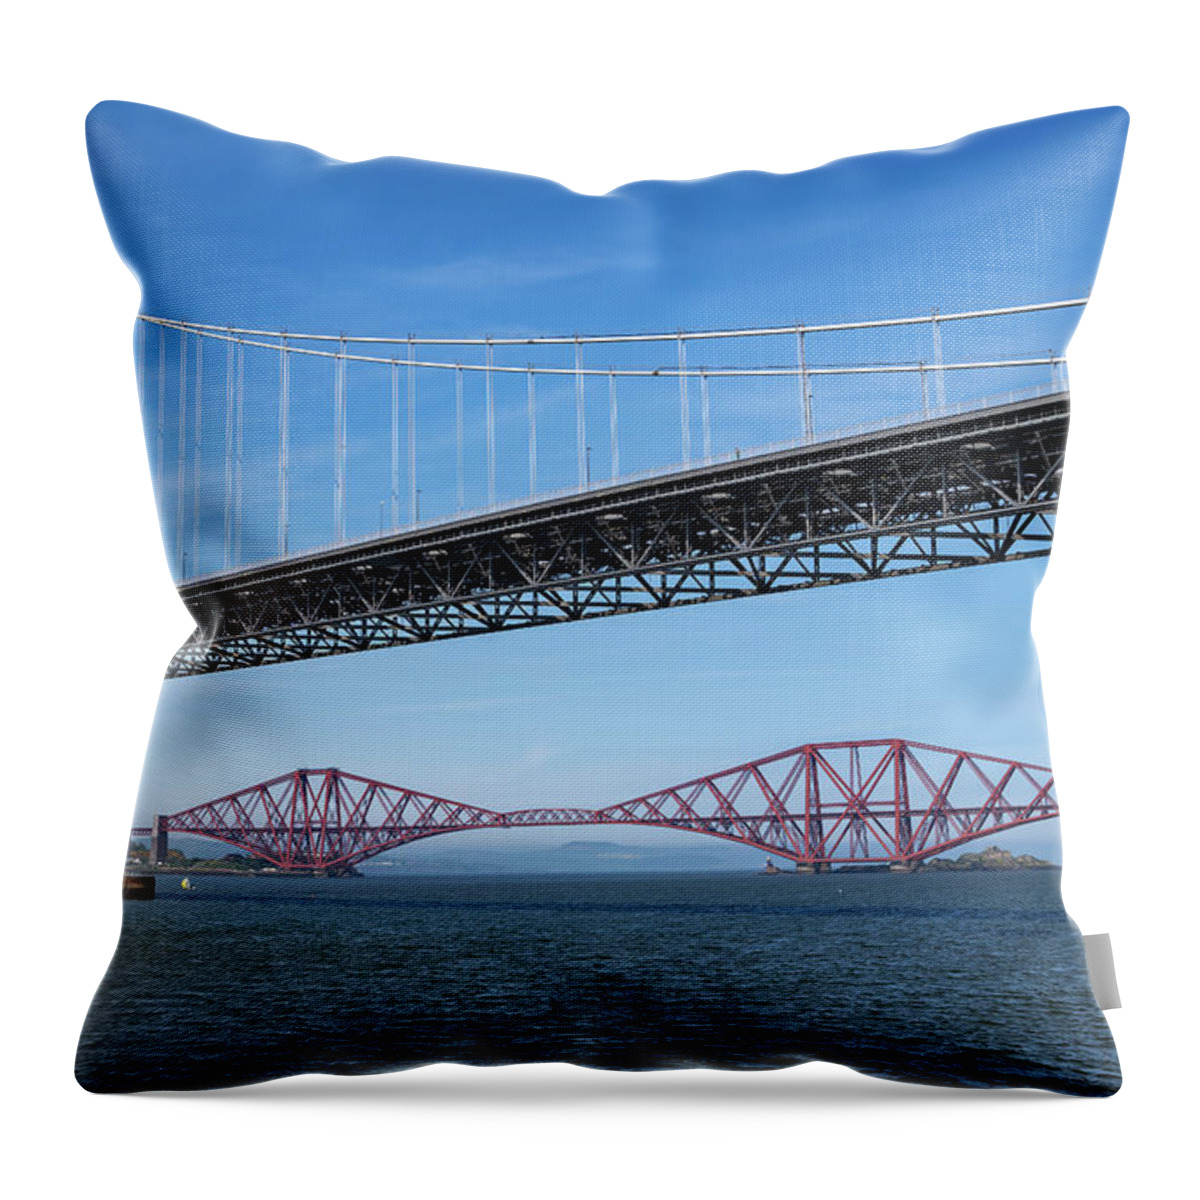 Forth Throw Pillow featuring the photograph Firth Of Forth Bridges In Scotland by Artur Bogacki